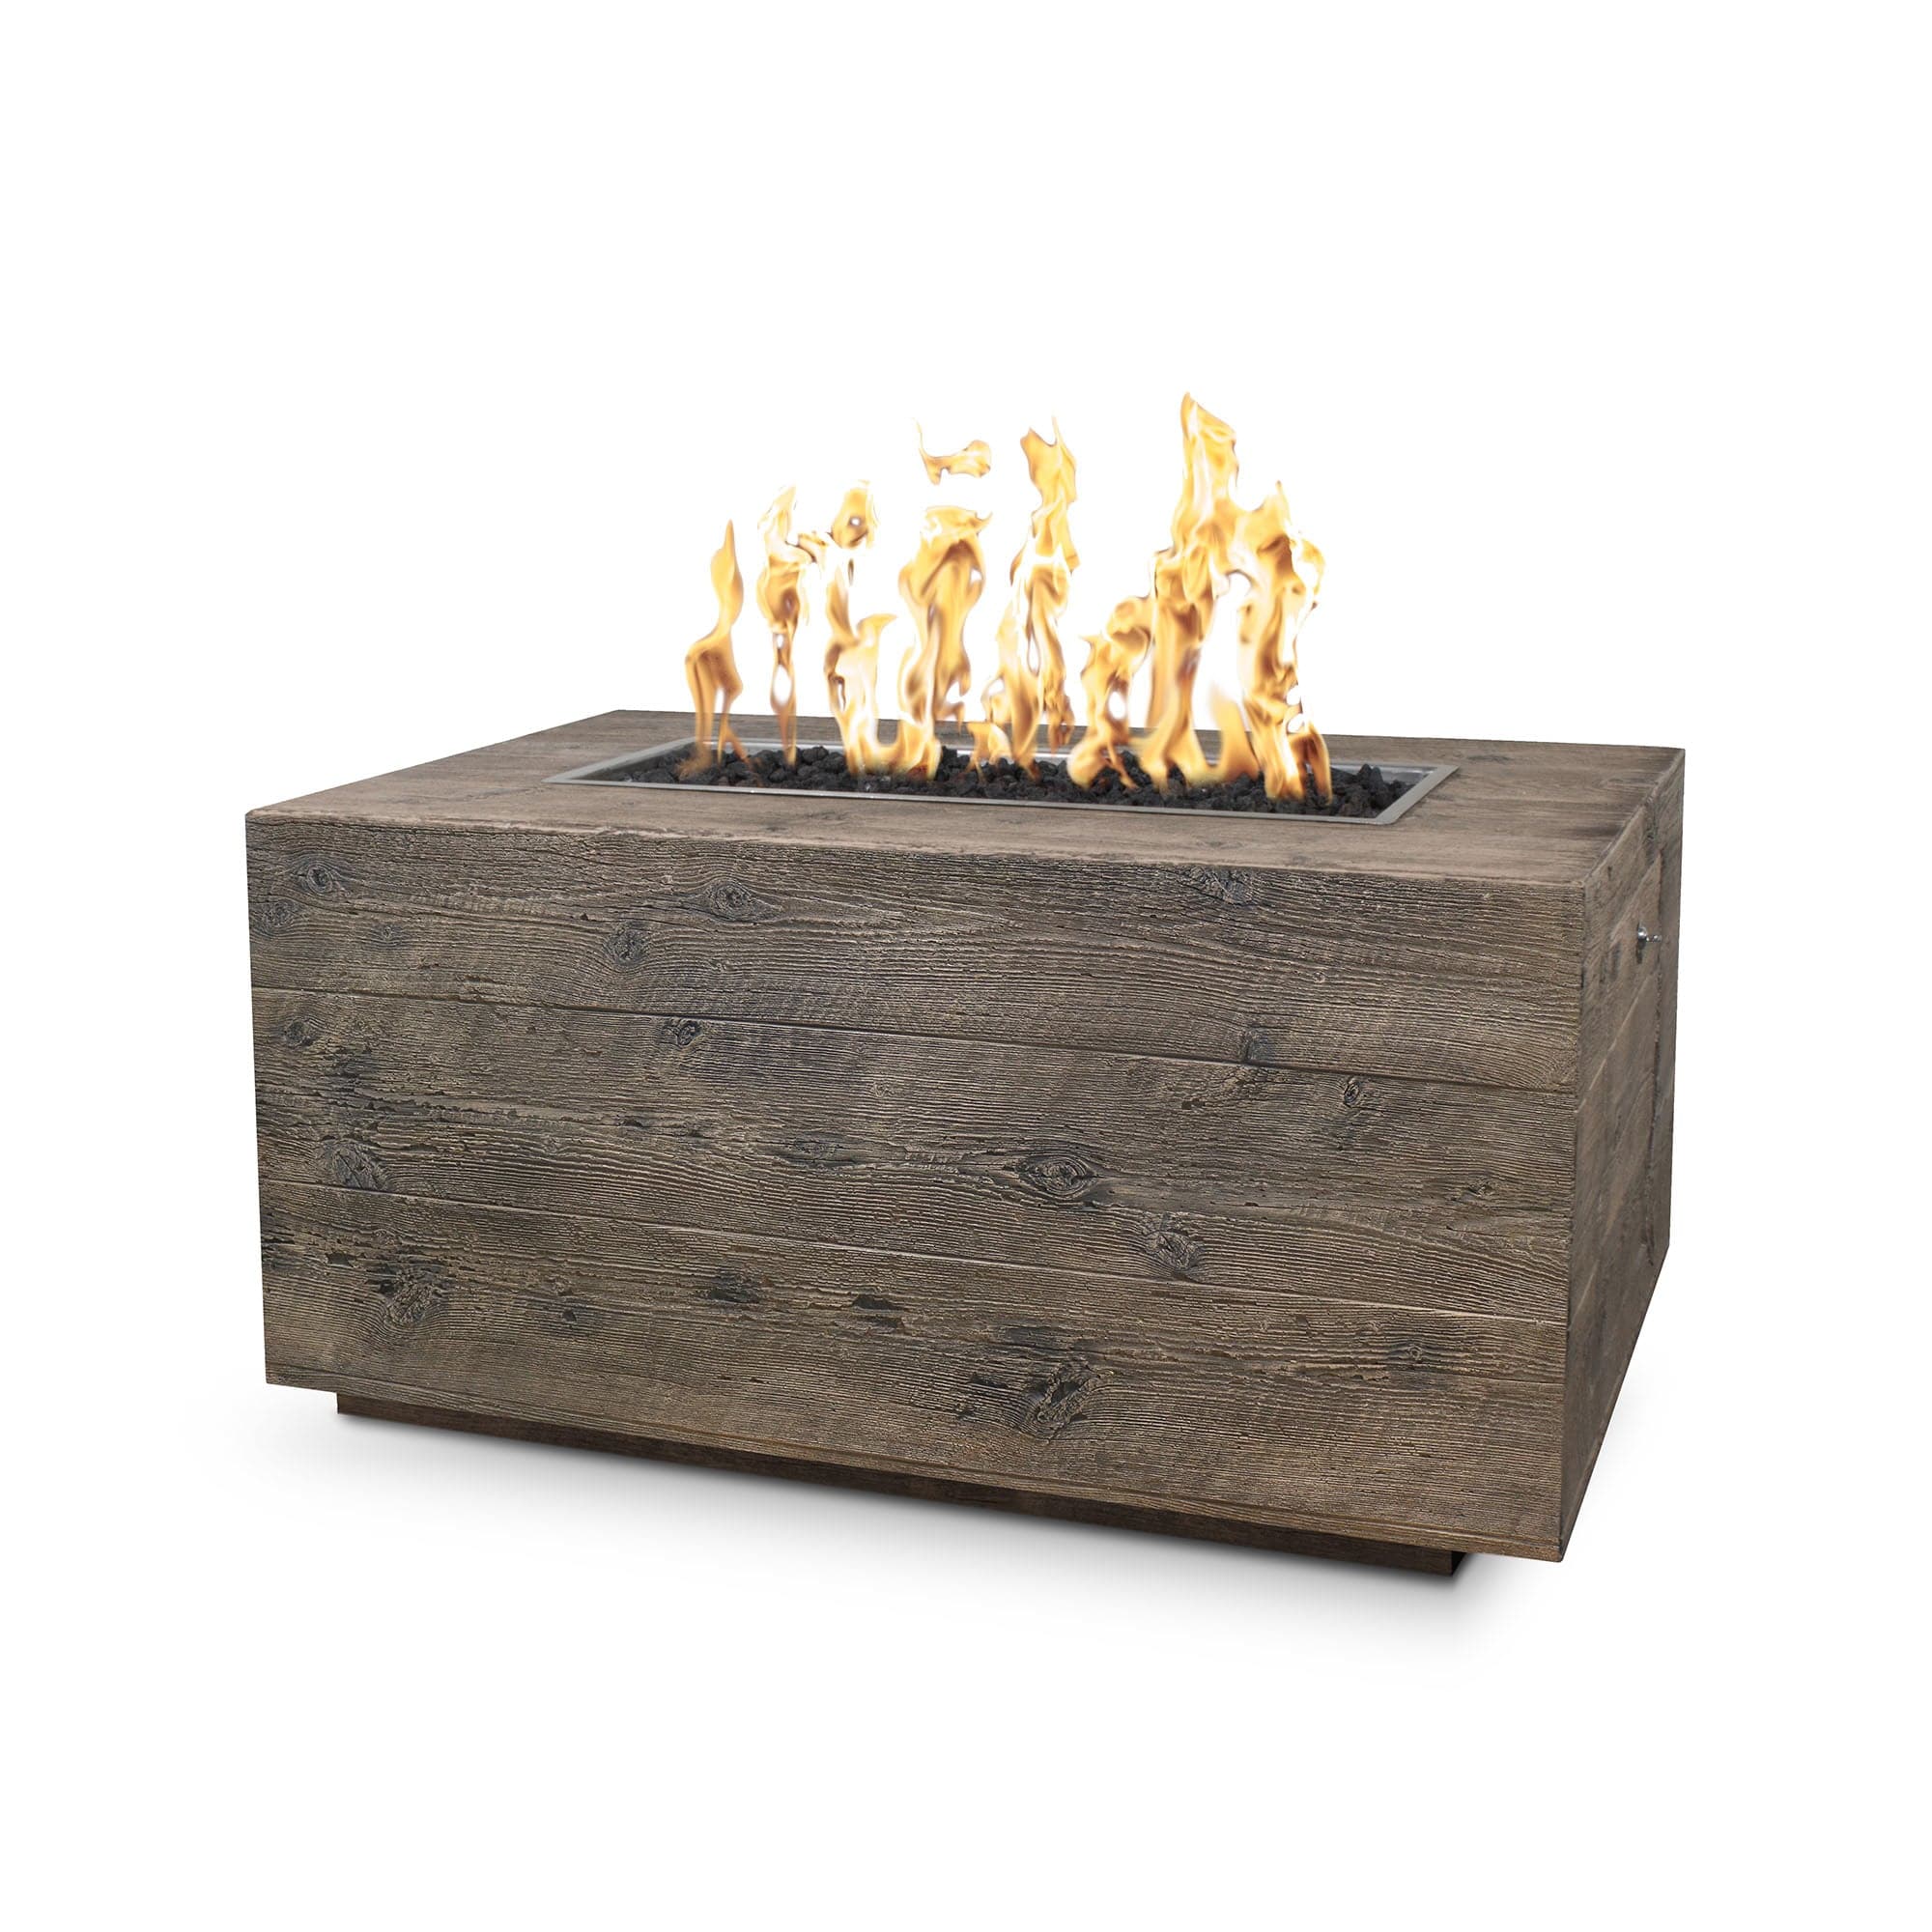 The Outdoor Pus Catalina Fire Pit Wood Grain OPT-CTLXX - Serenity Provision